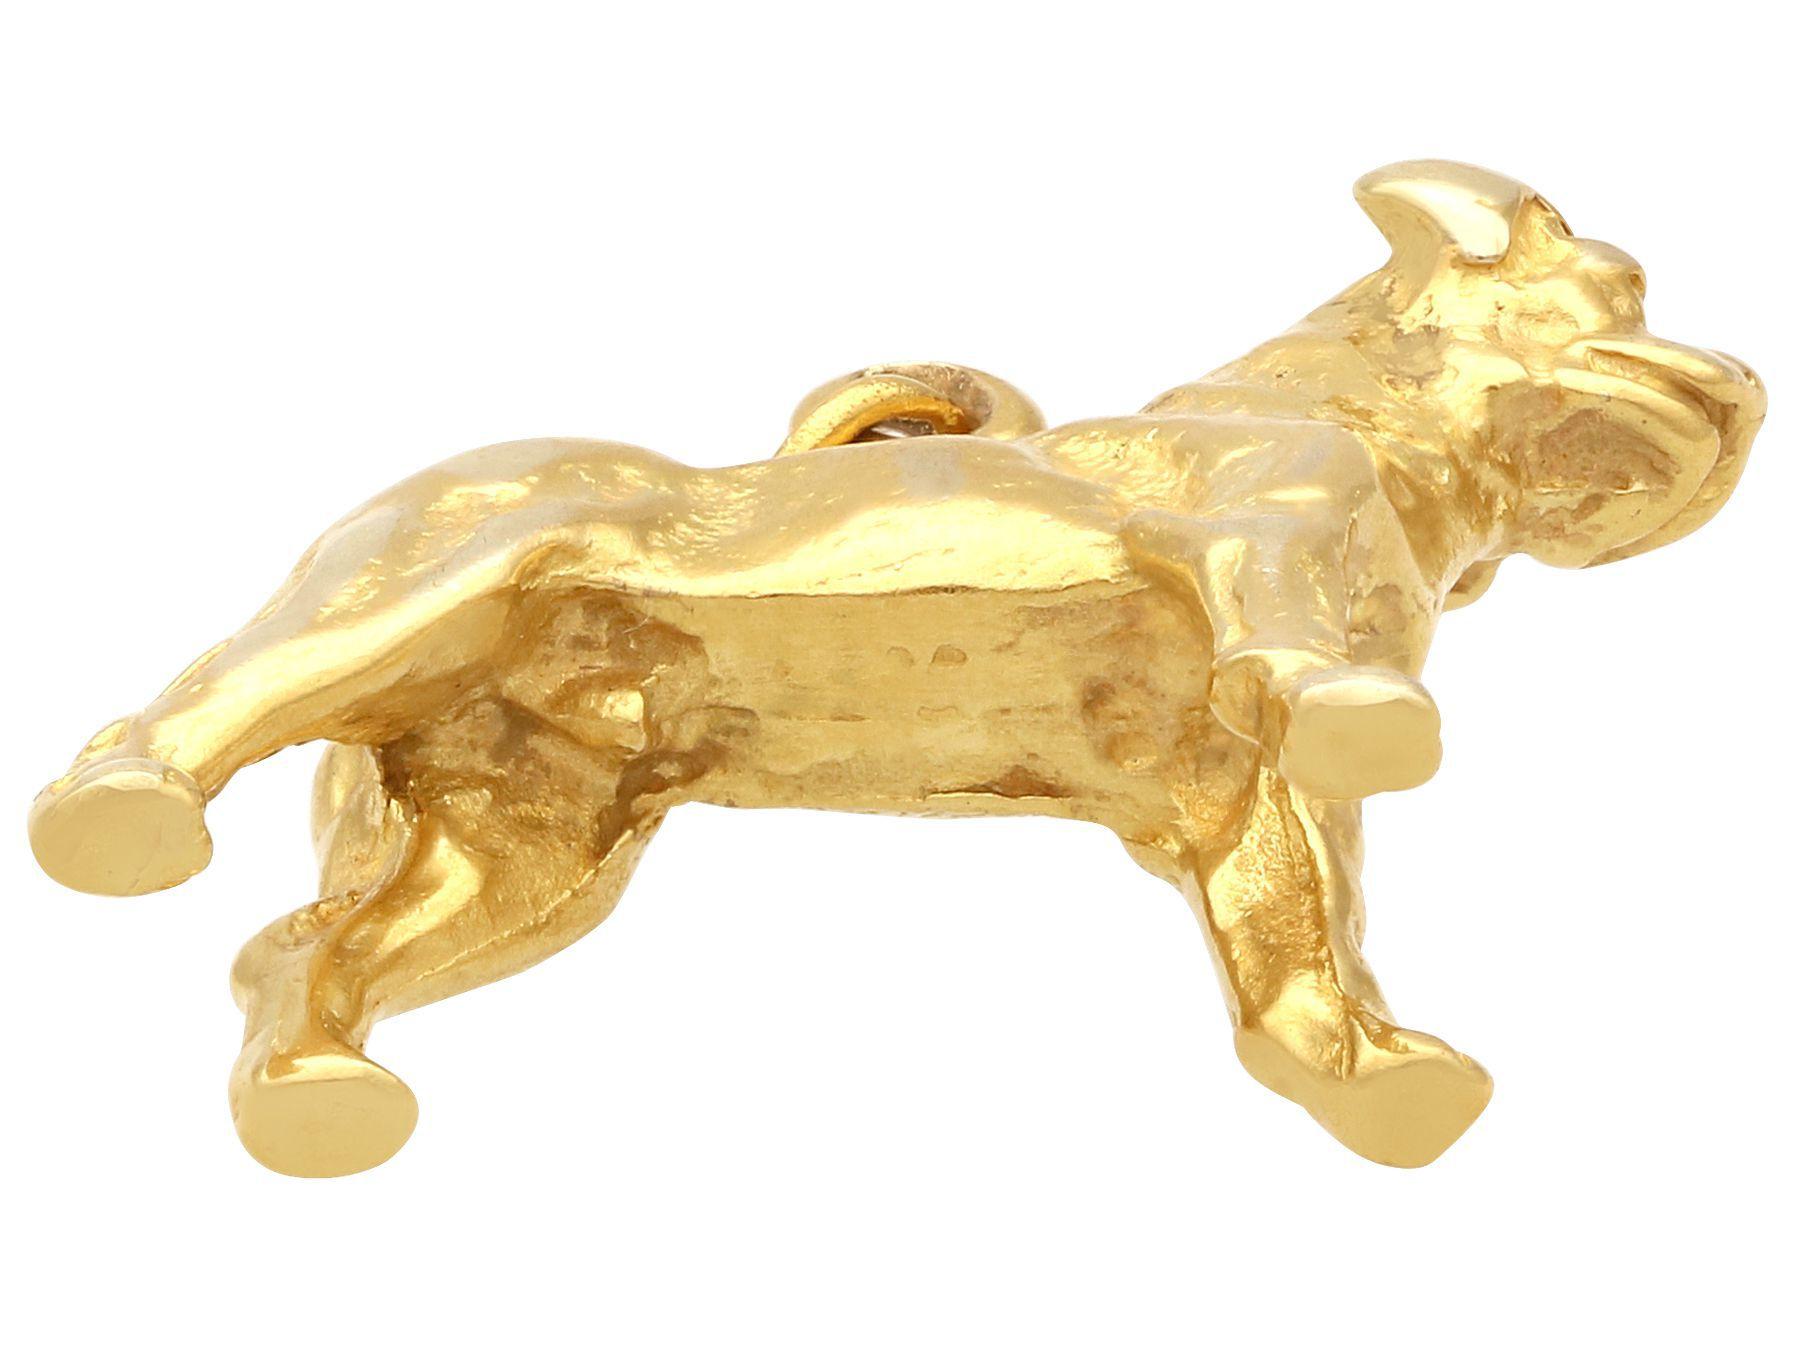 Vintage Yellow Gold Dog Charm / Pendant Vintage In Excellent Condition For Sale In Jesmond, Newcastle Upon Tyne